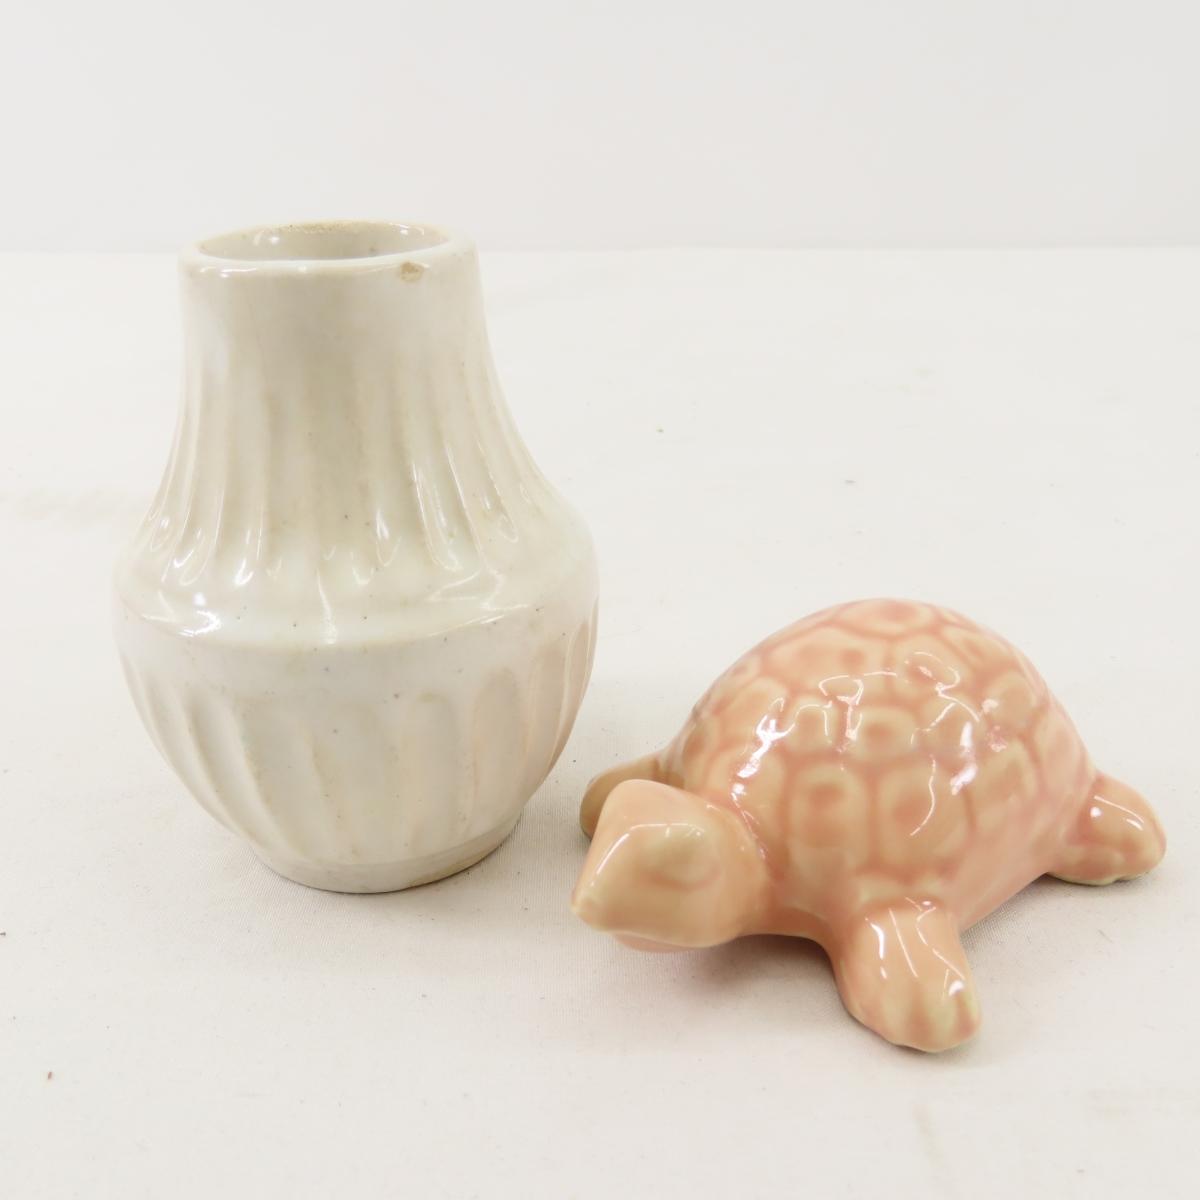 Frankoma Pottery Collector Pieces